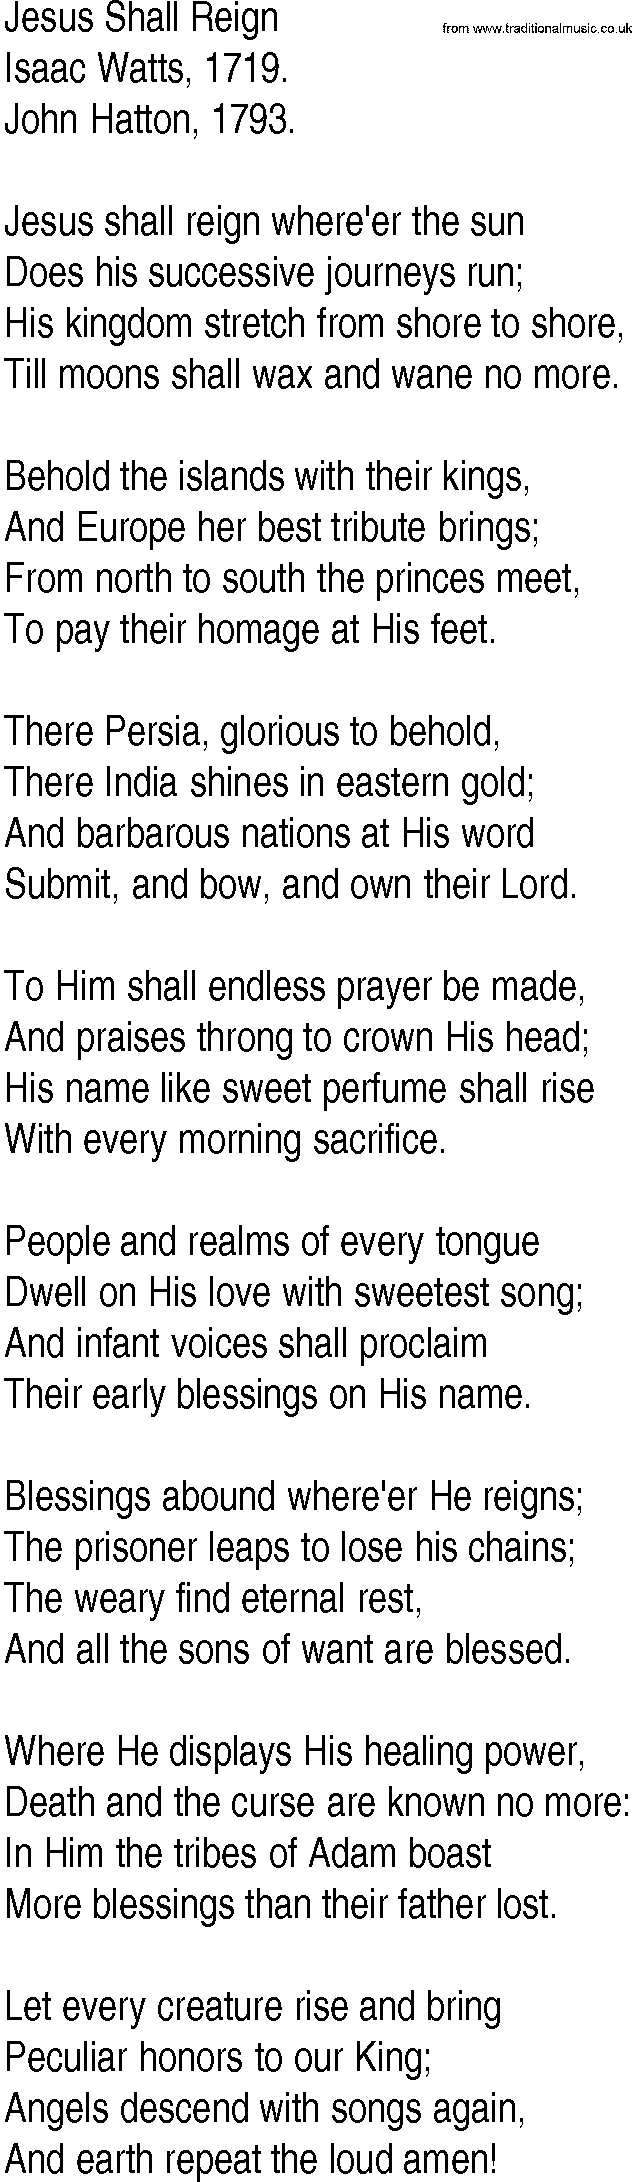 Hymn and Gospel Song: Jesus Shall Reign by Isaac Watts lyrics